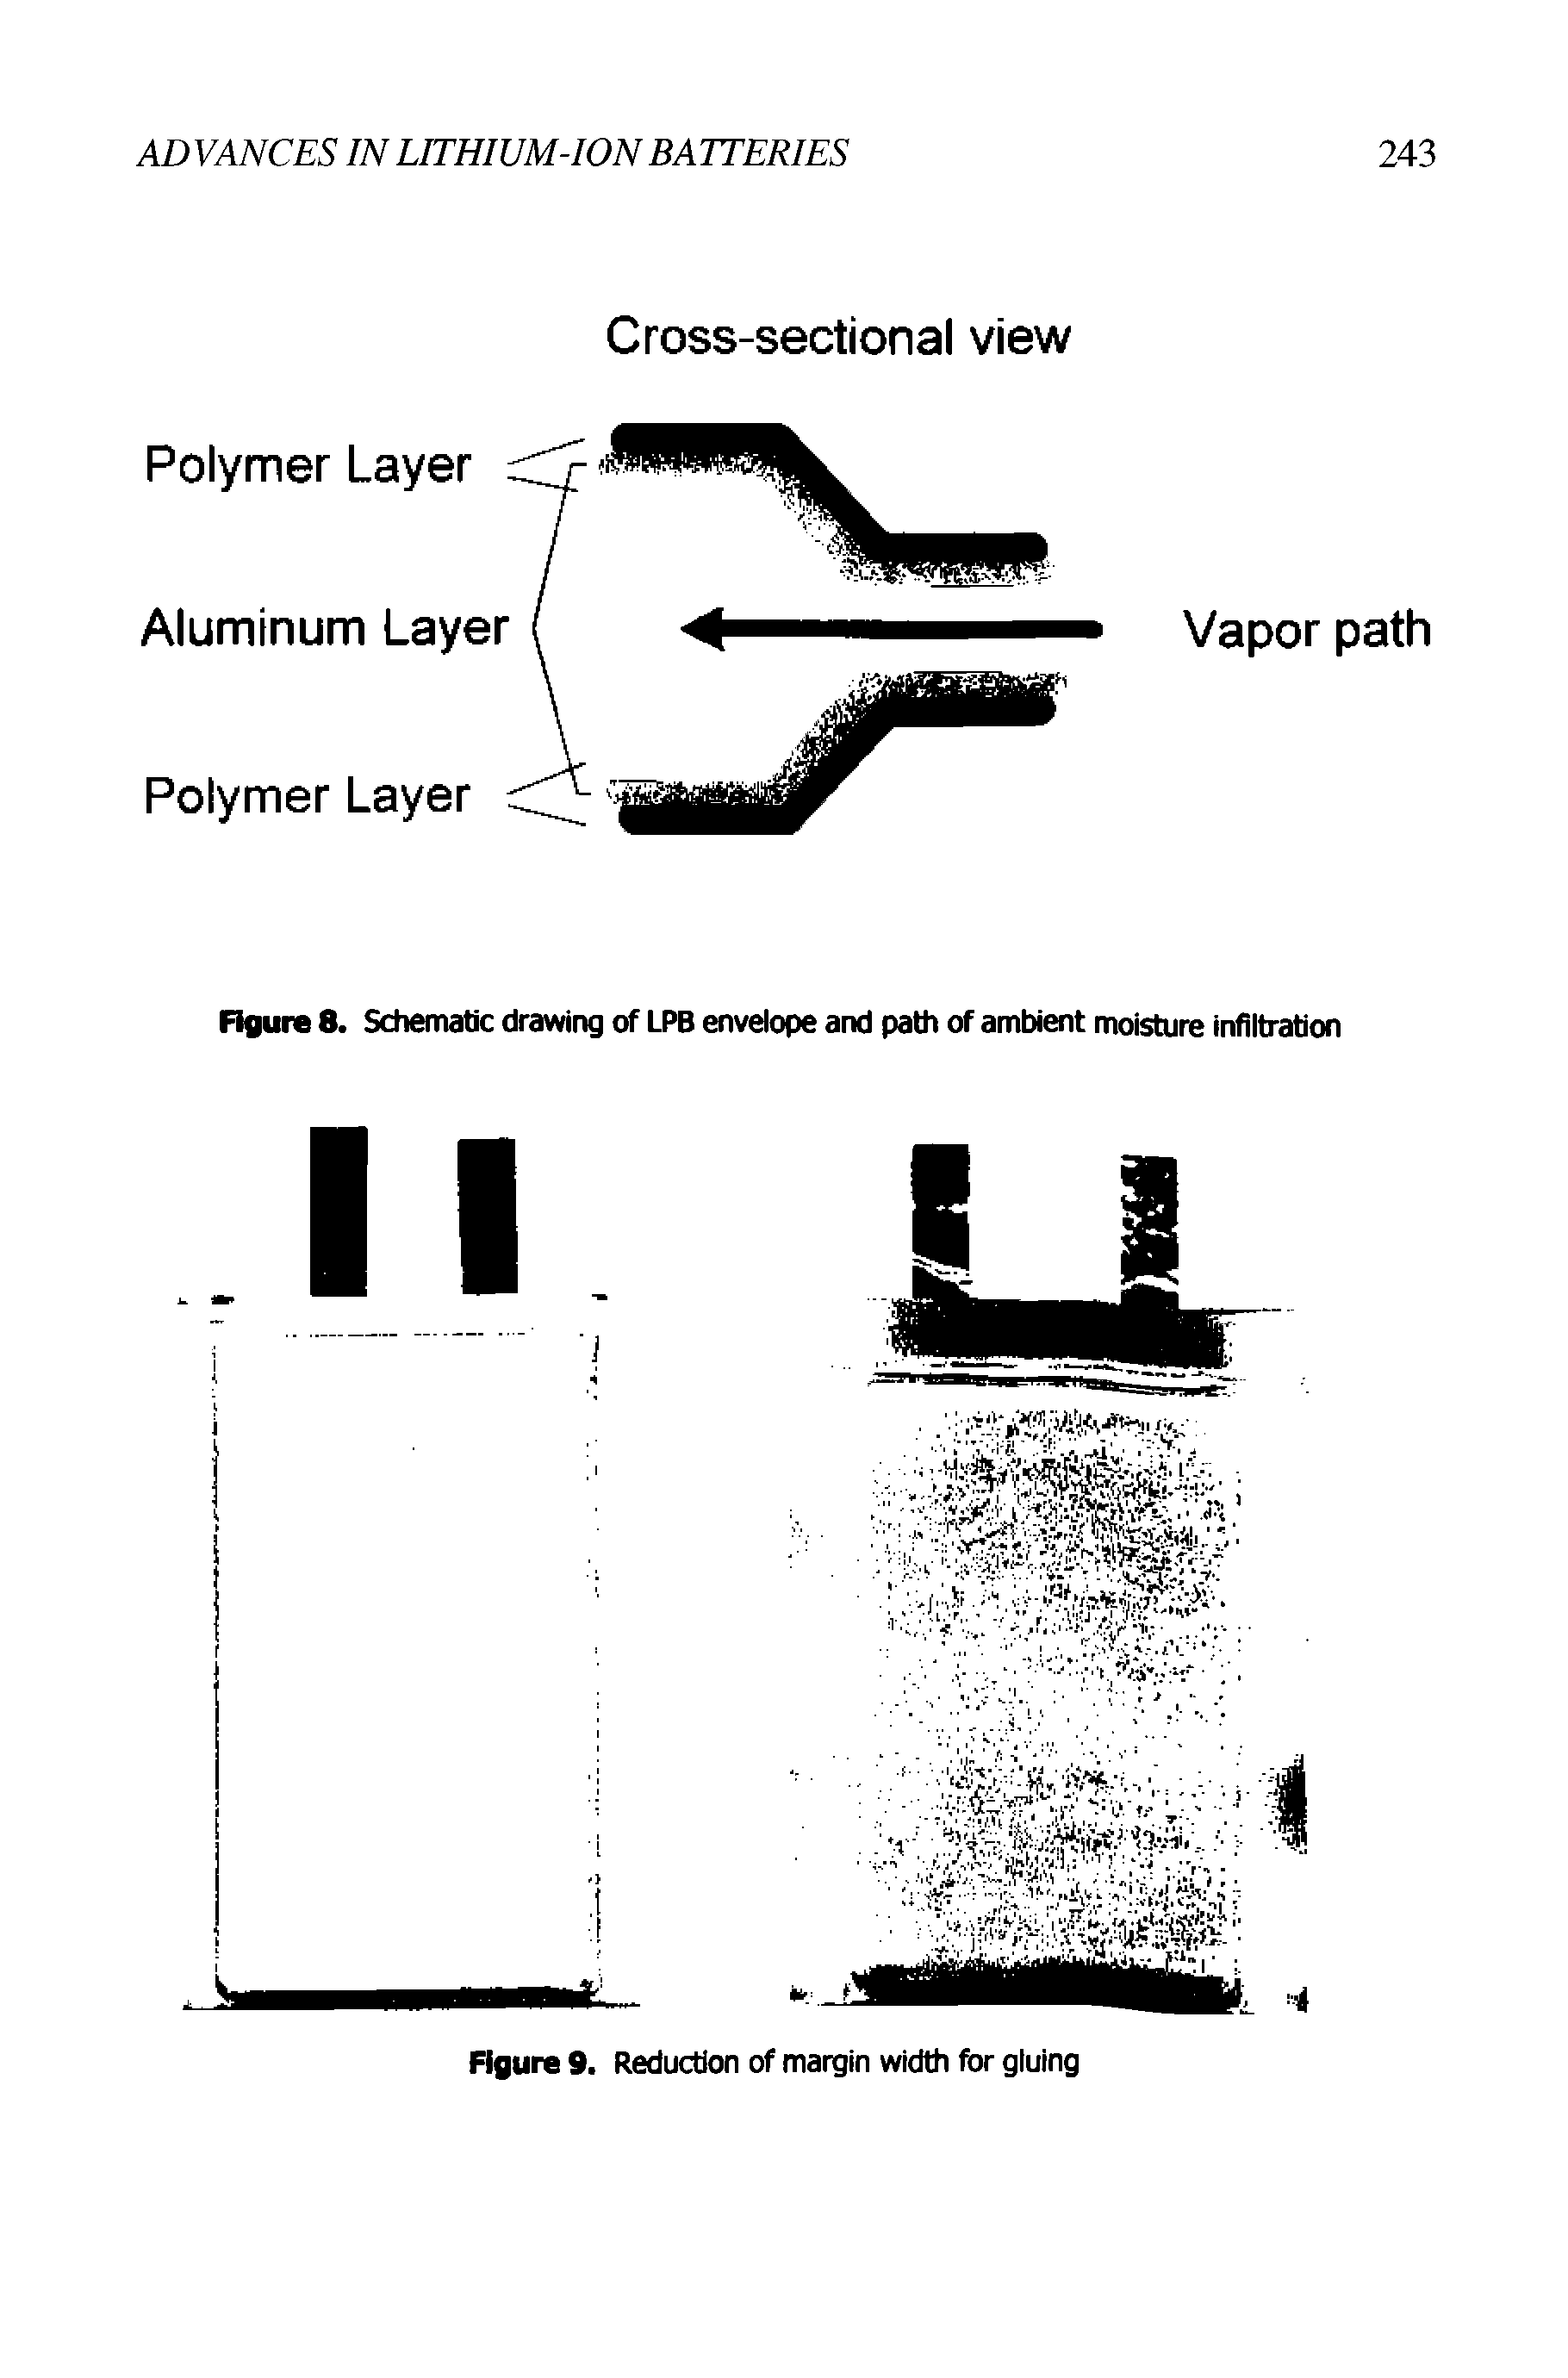 Figure 8. Schematic drawing of LPB envelope and path of ambient moisture infiltration...